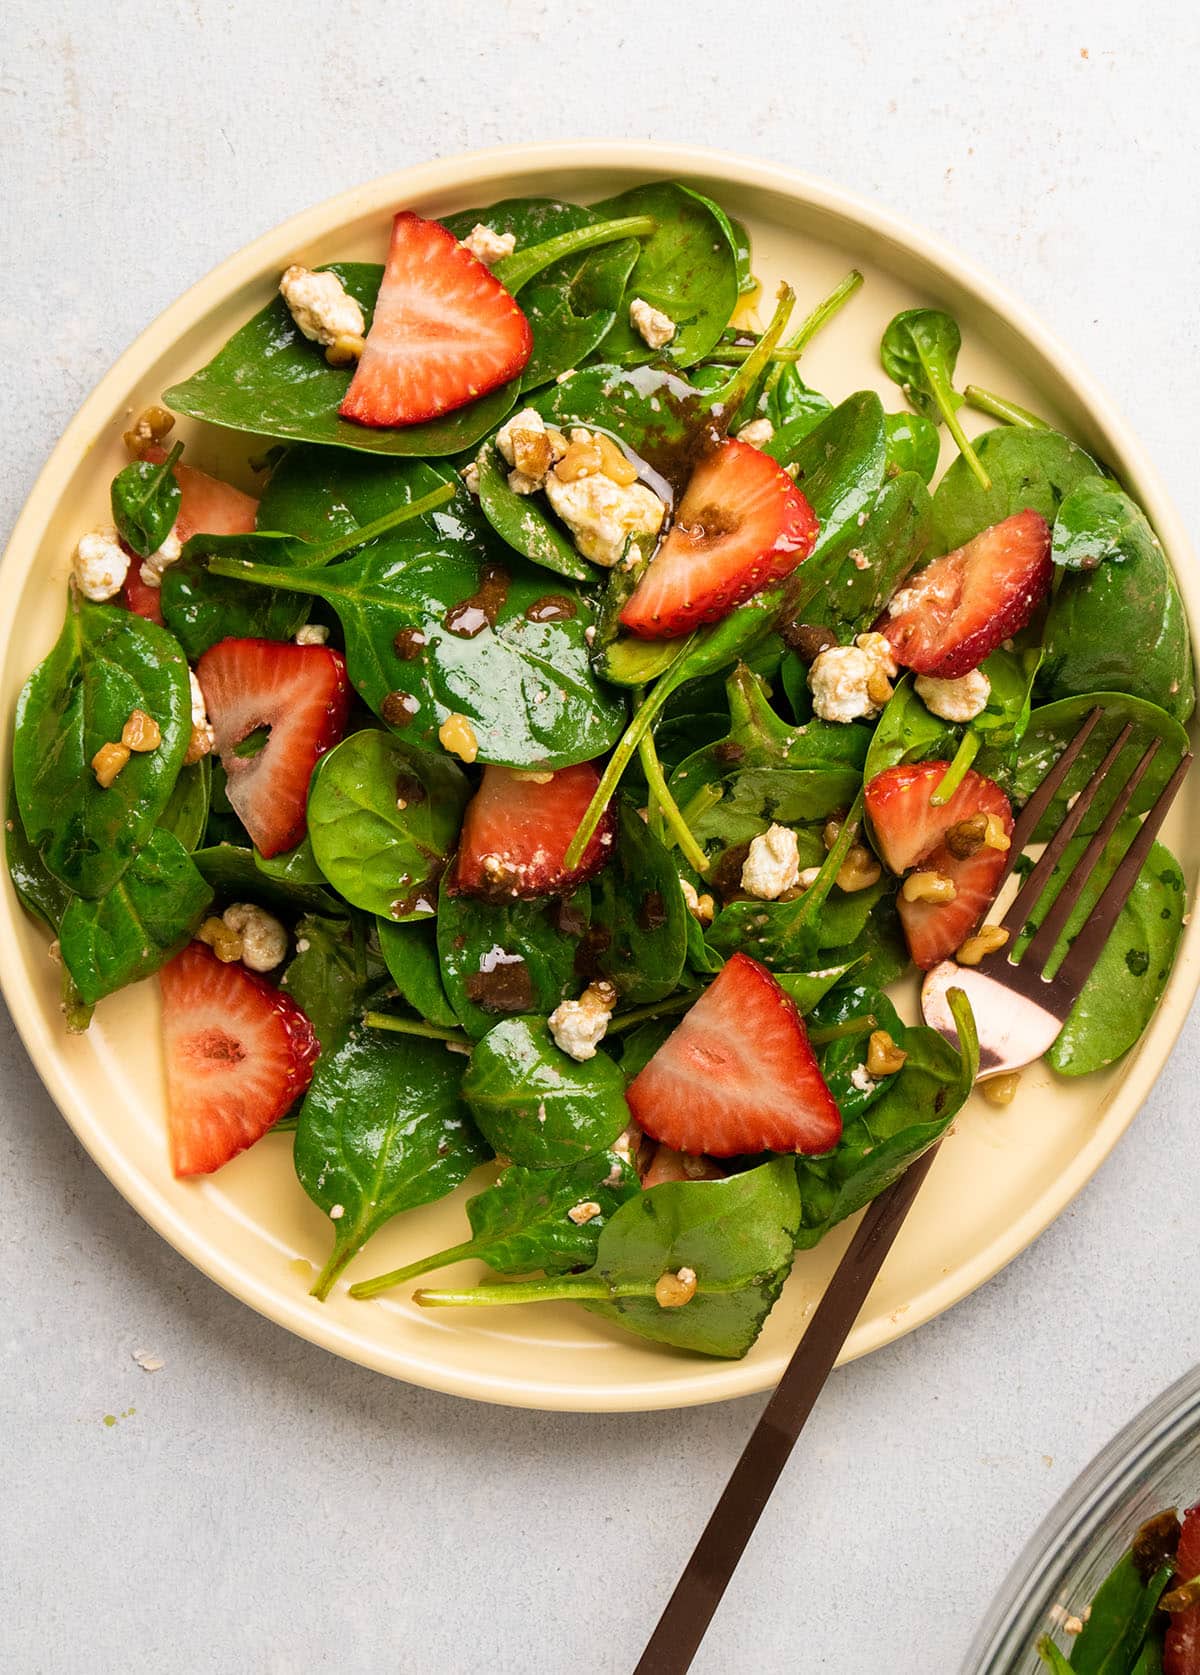 Spinach salad topped with sliced strawberries.